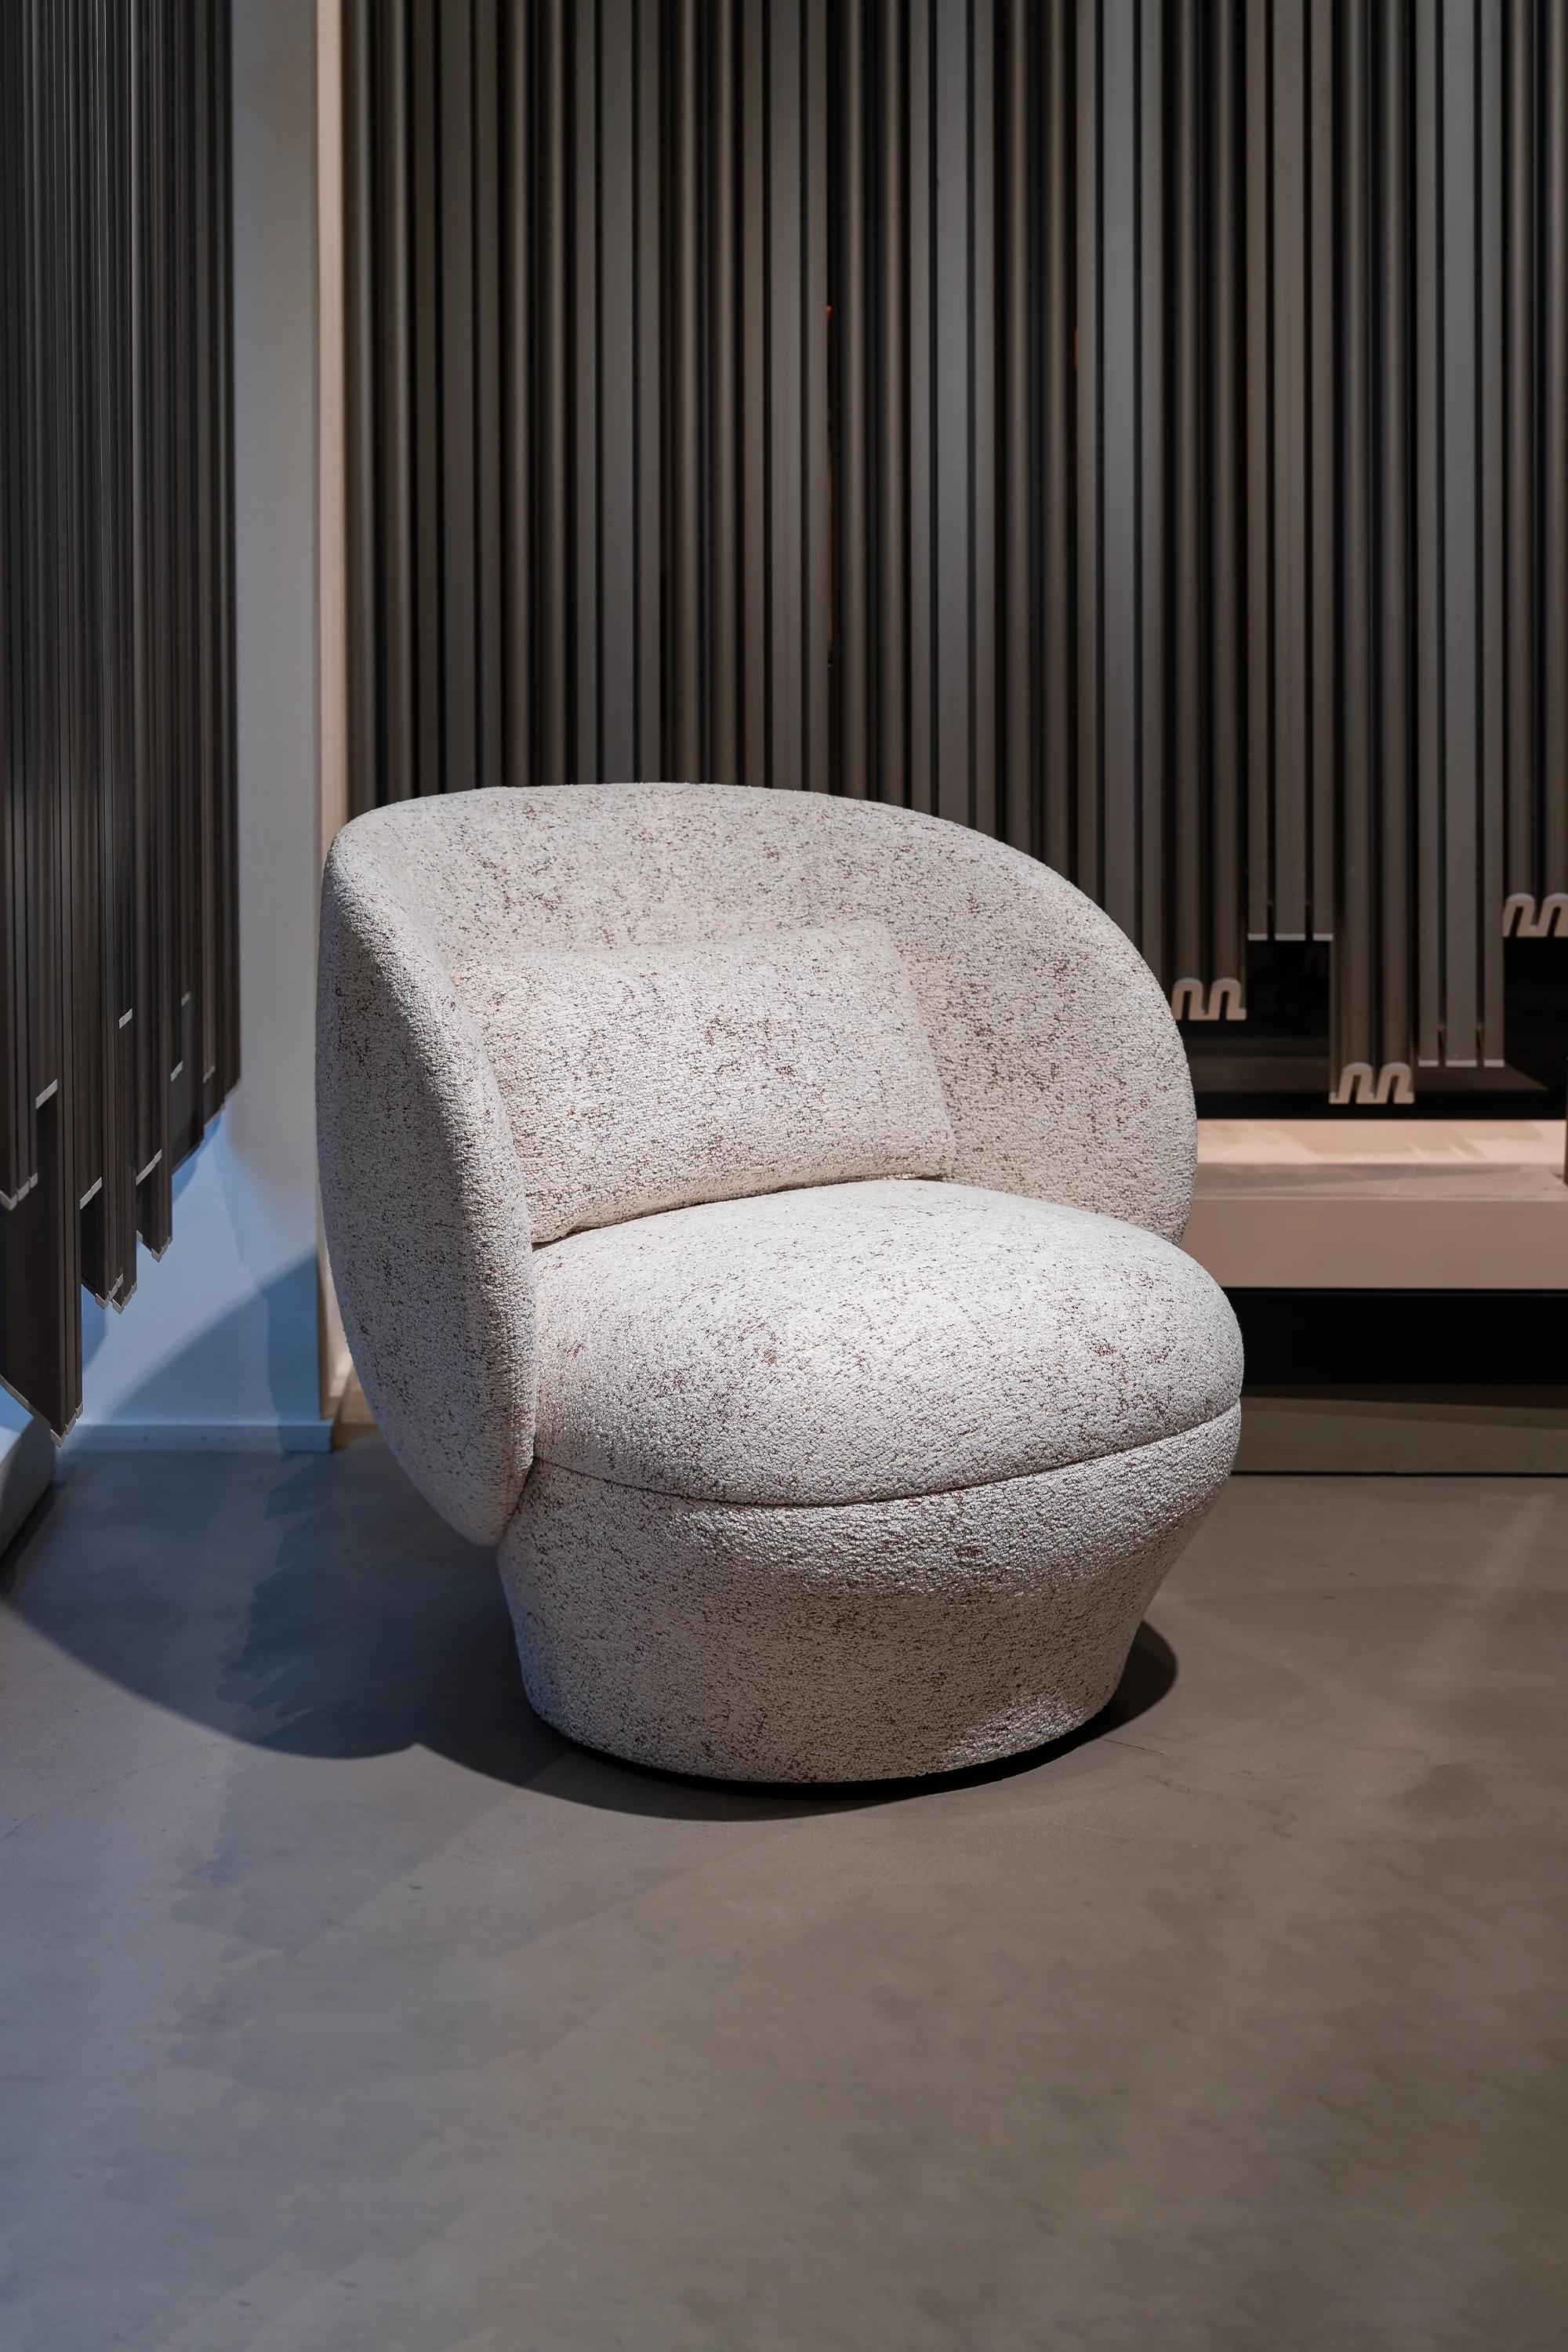 Moro is a cosy cocoon of a chair. Named after a famous Venetian Doge, the design evokes the strong personality of an Italian palazzo’s lush interior. A warm and welcoming atmosphere that could never be forgotten. The chair consists of a single